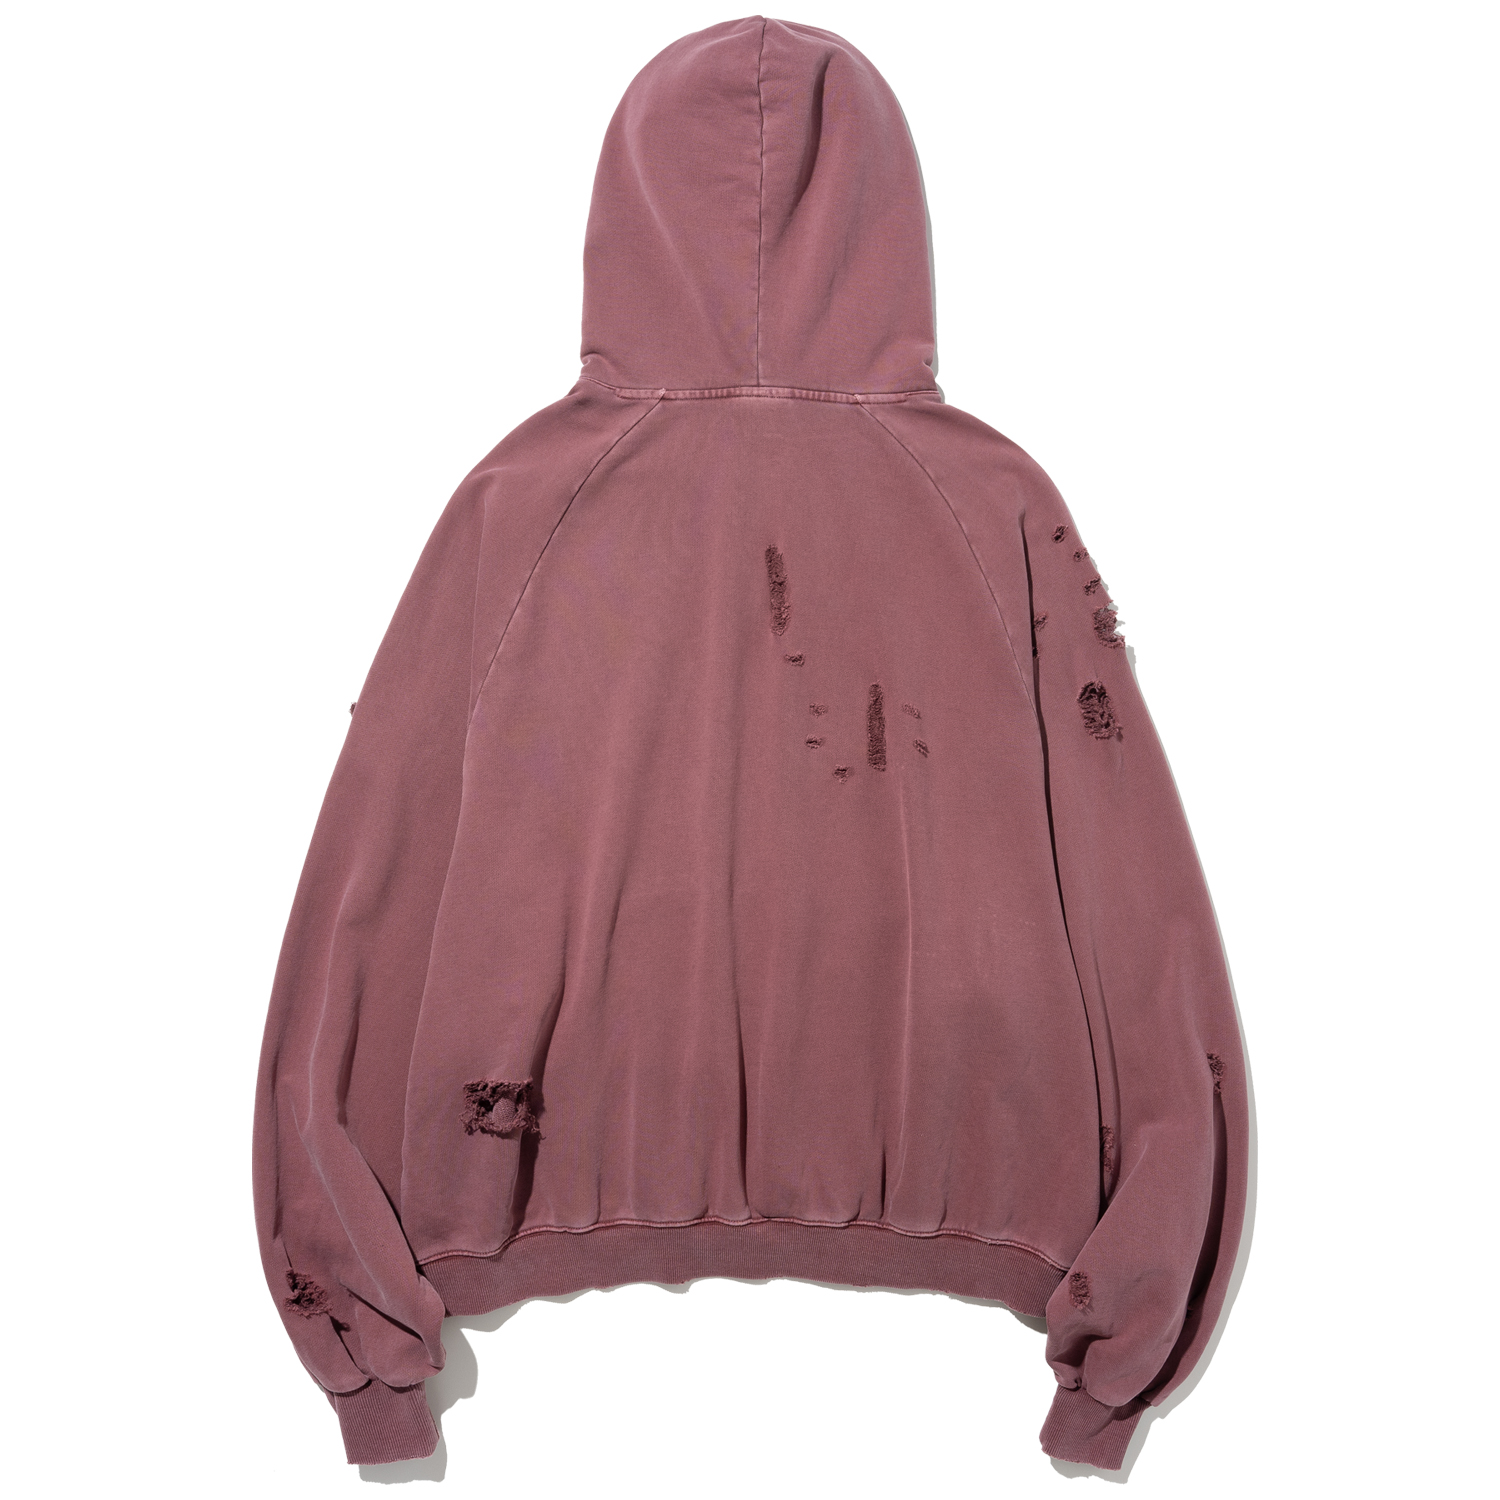 Destroyed Pigment Goat Pullover Hood - Red,NOT4NERD